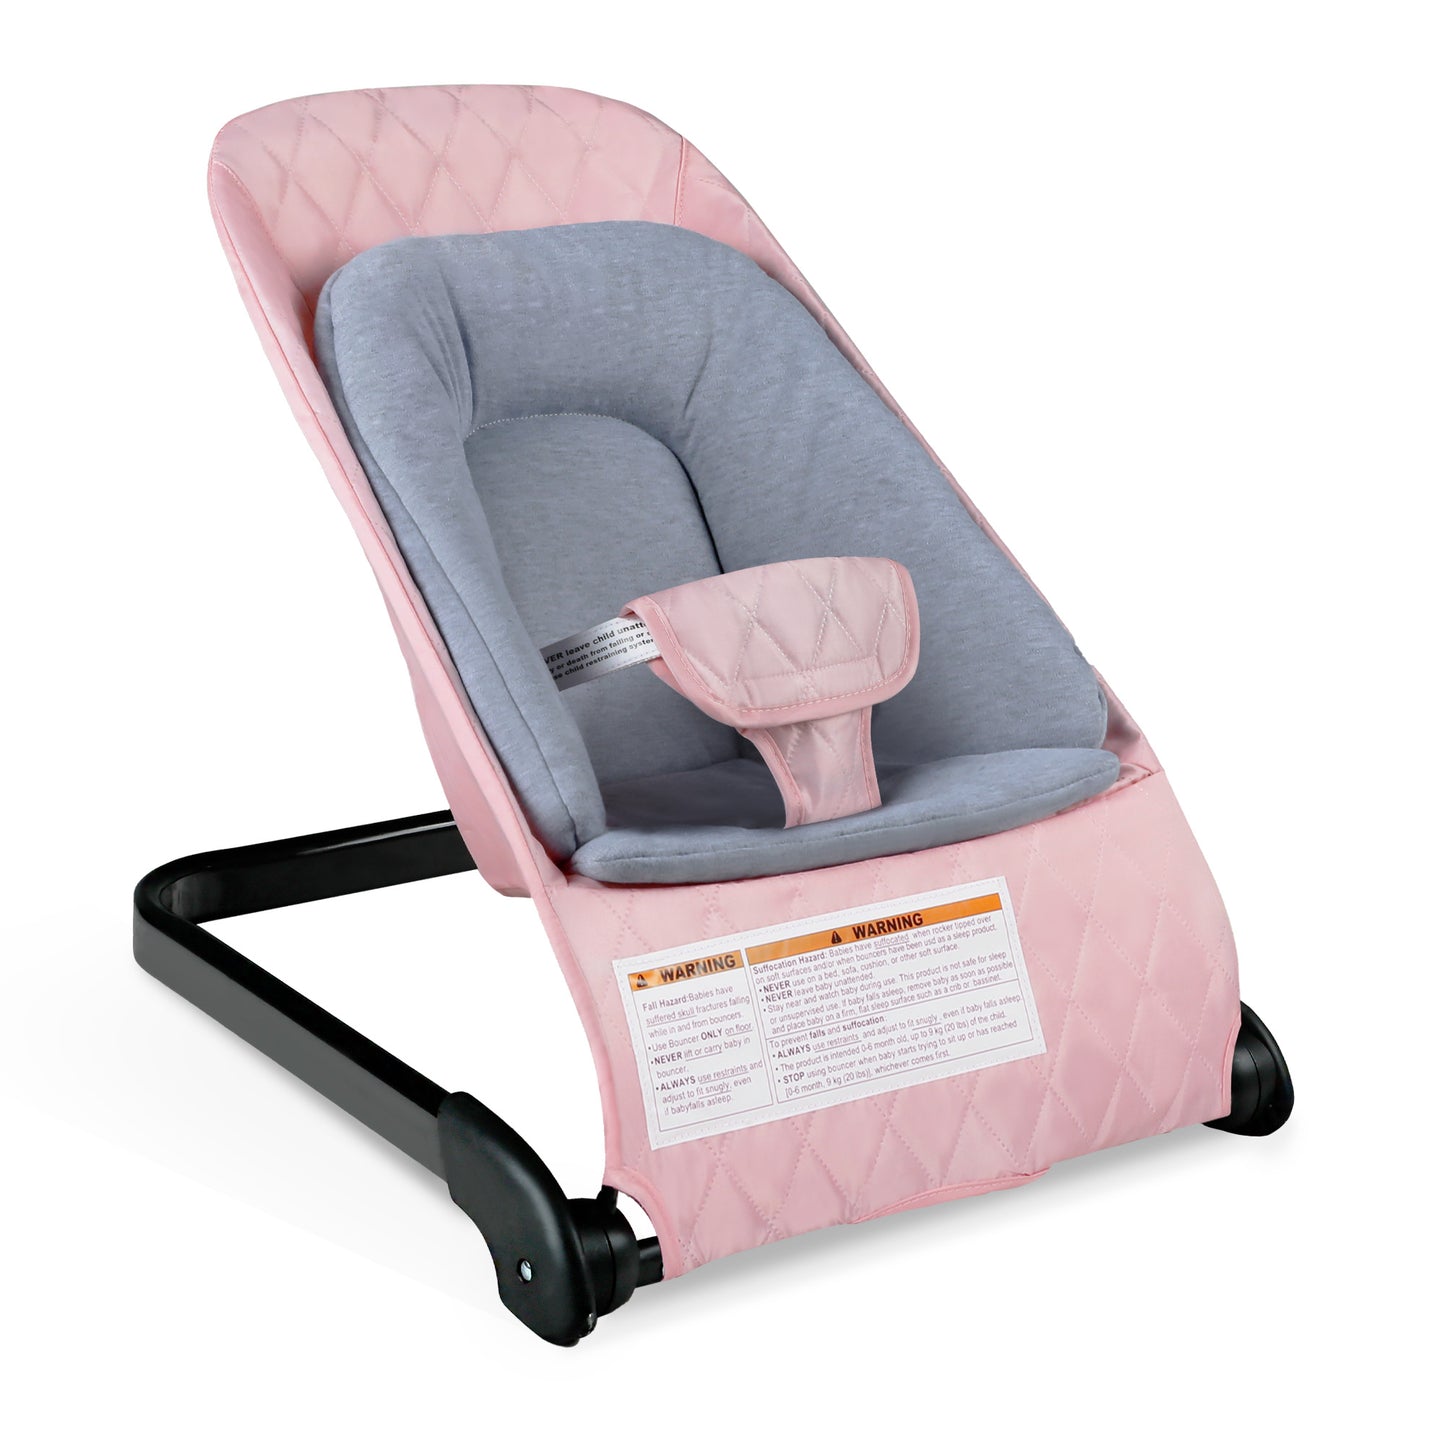 Baby Bouncer for Infants 3 in 1 Folding Baby Rocker Seat Unisex Lounge Recline Chair, Pink